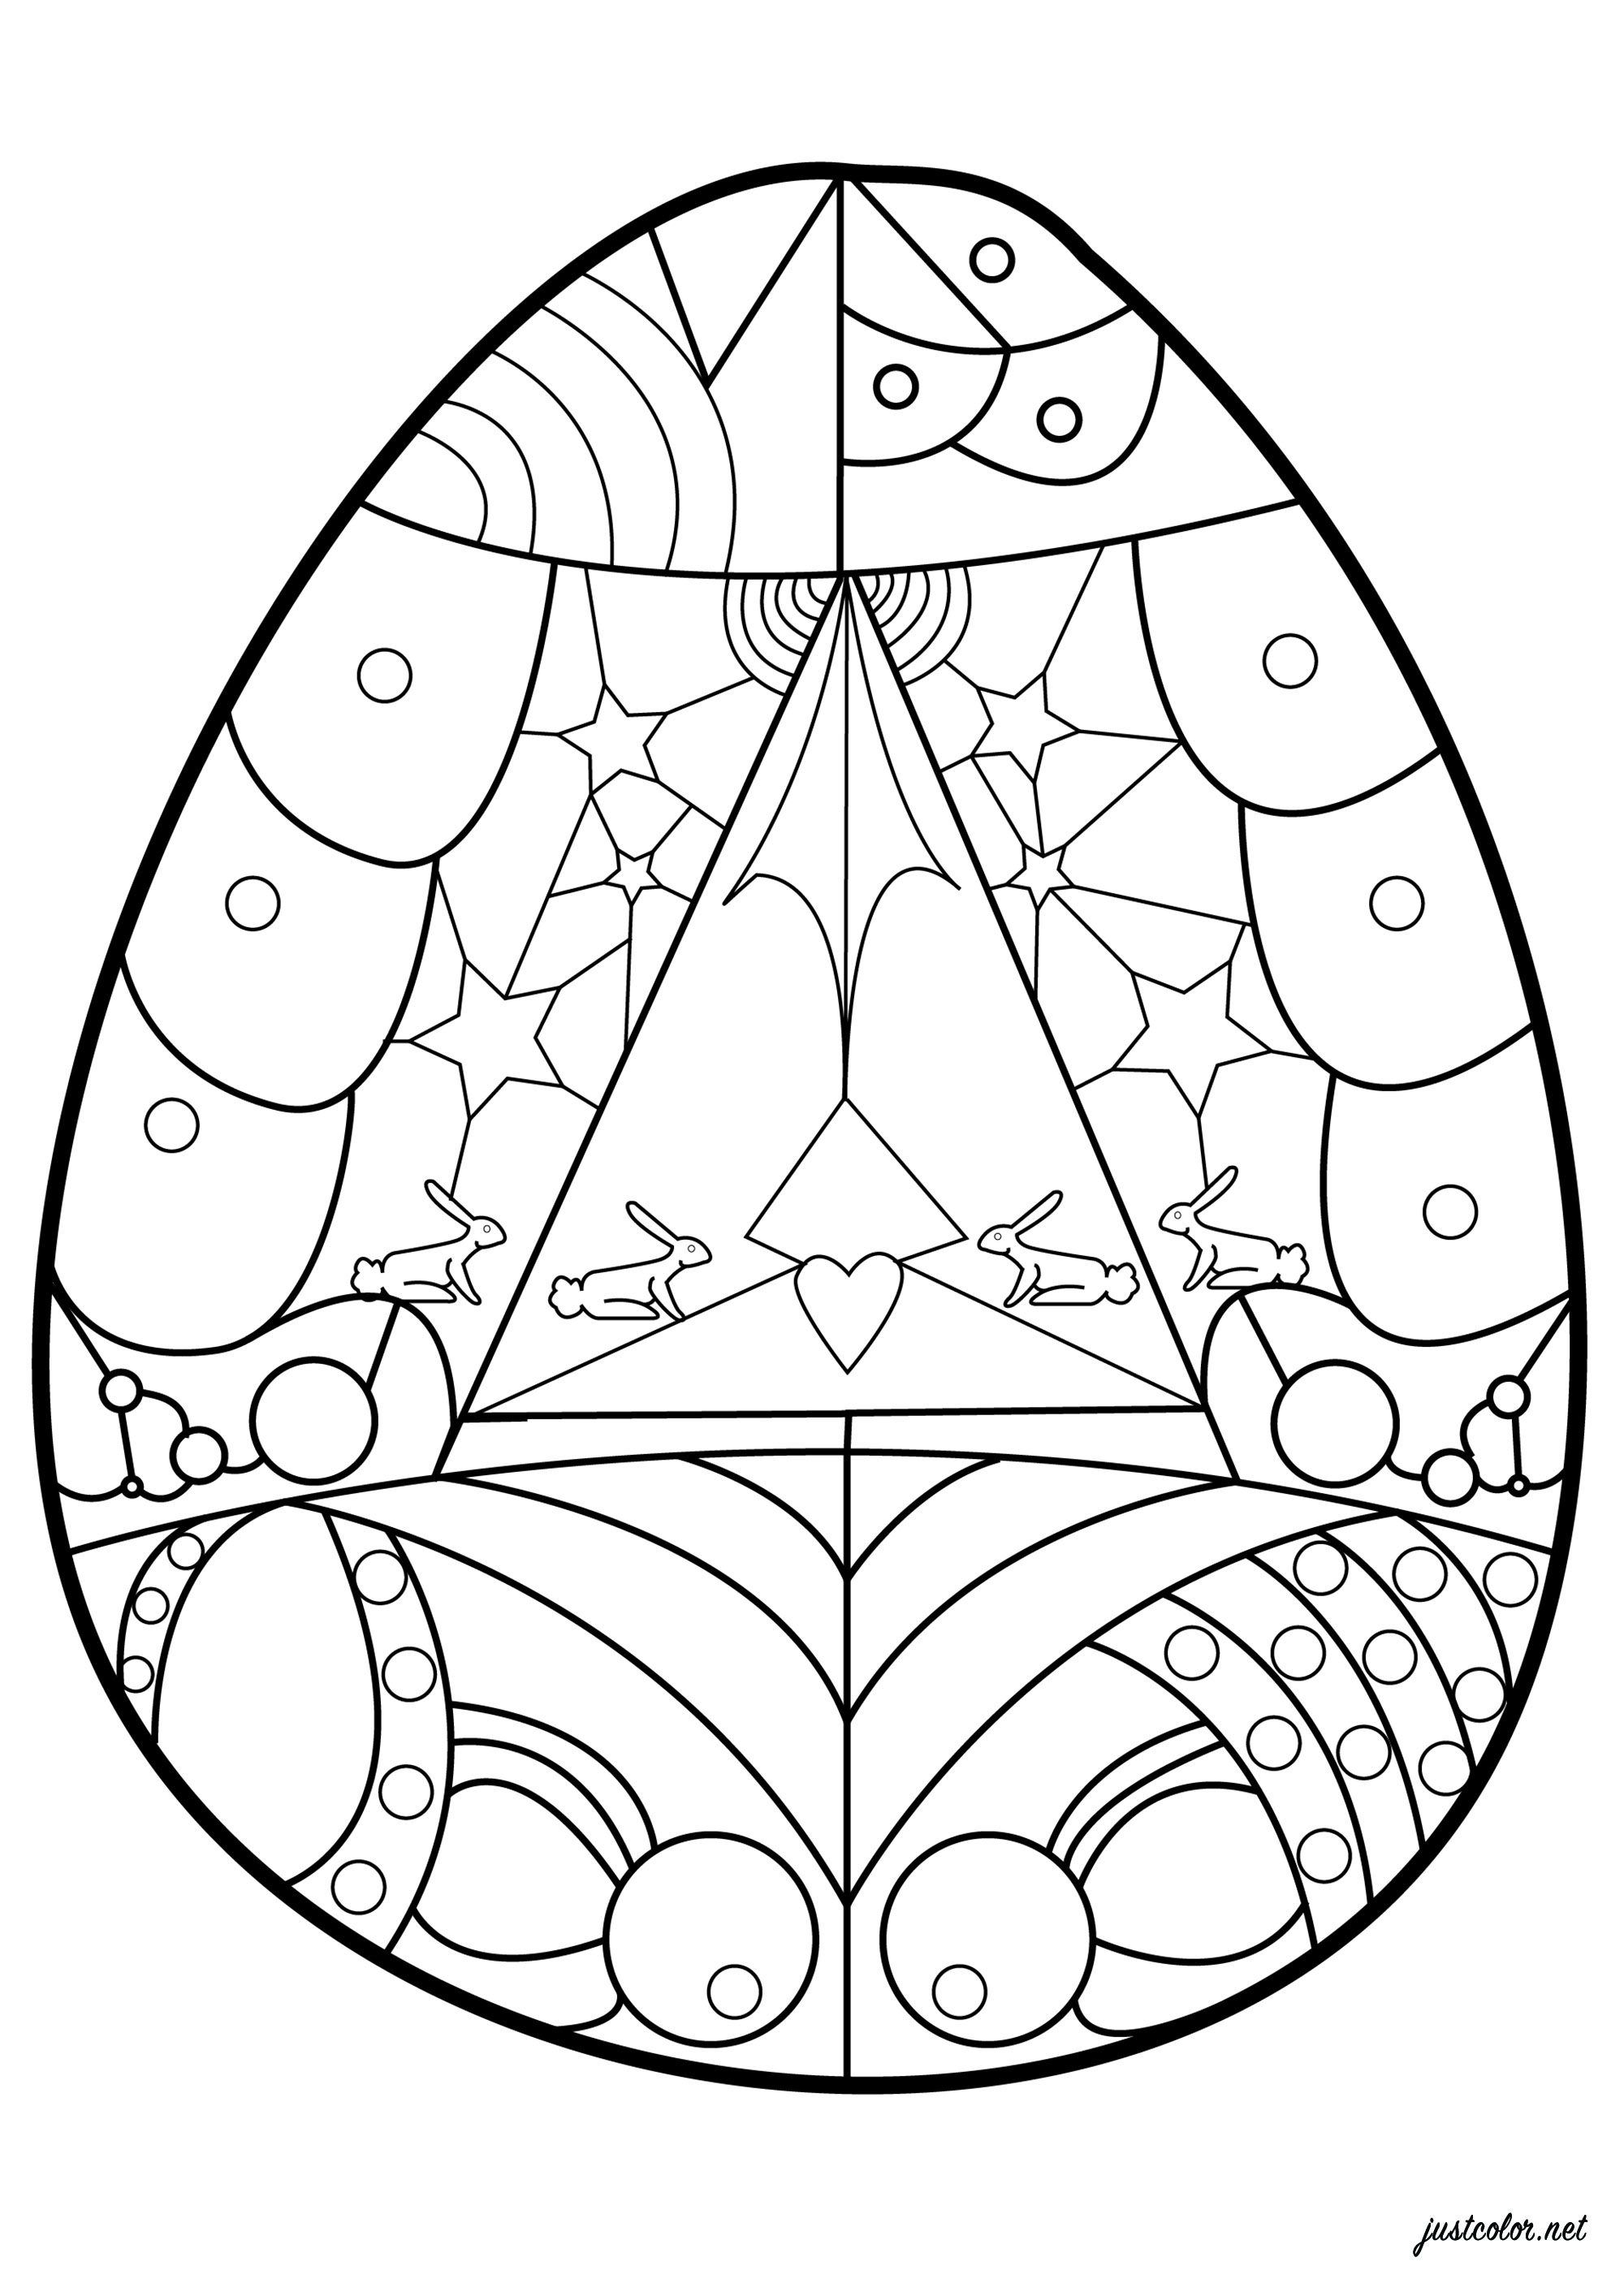 Geometric Easter Egg - Easter Adult Coloring Pages